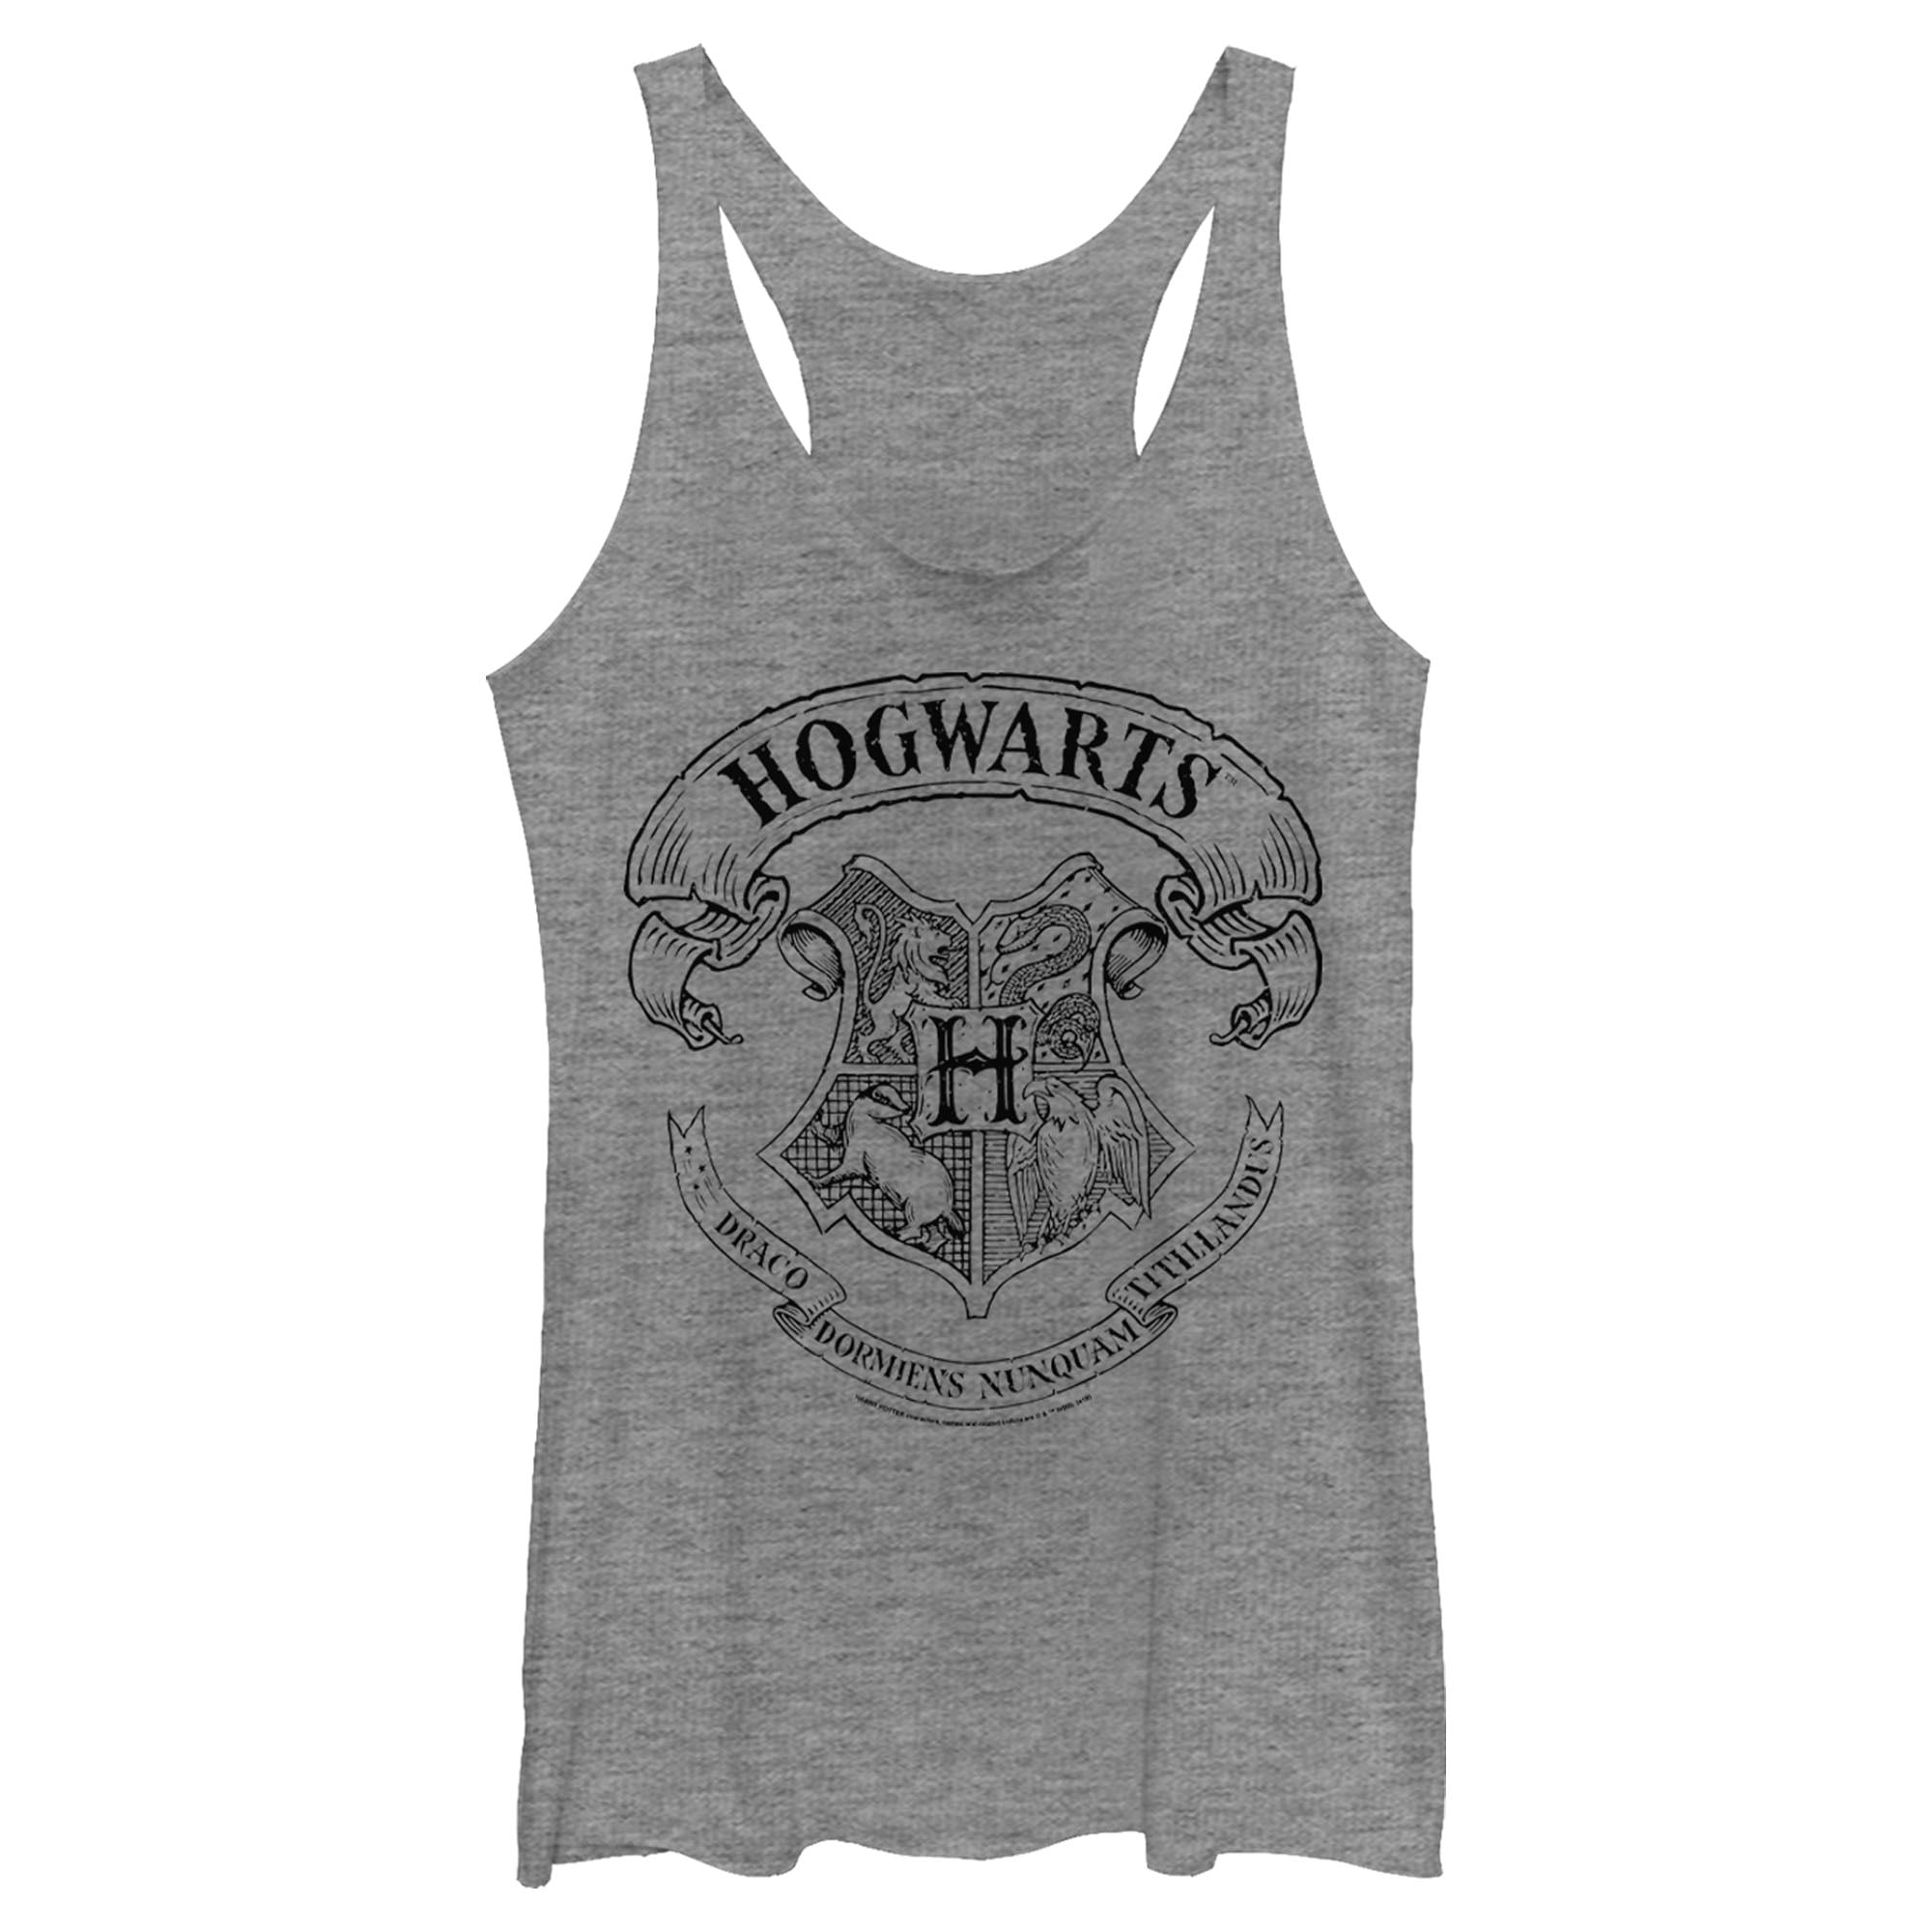 HARRY POTTER Youth Girls Raglan Tank Top Sleeveless T-Shirt The Wand Chooses The Wizard White